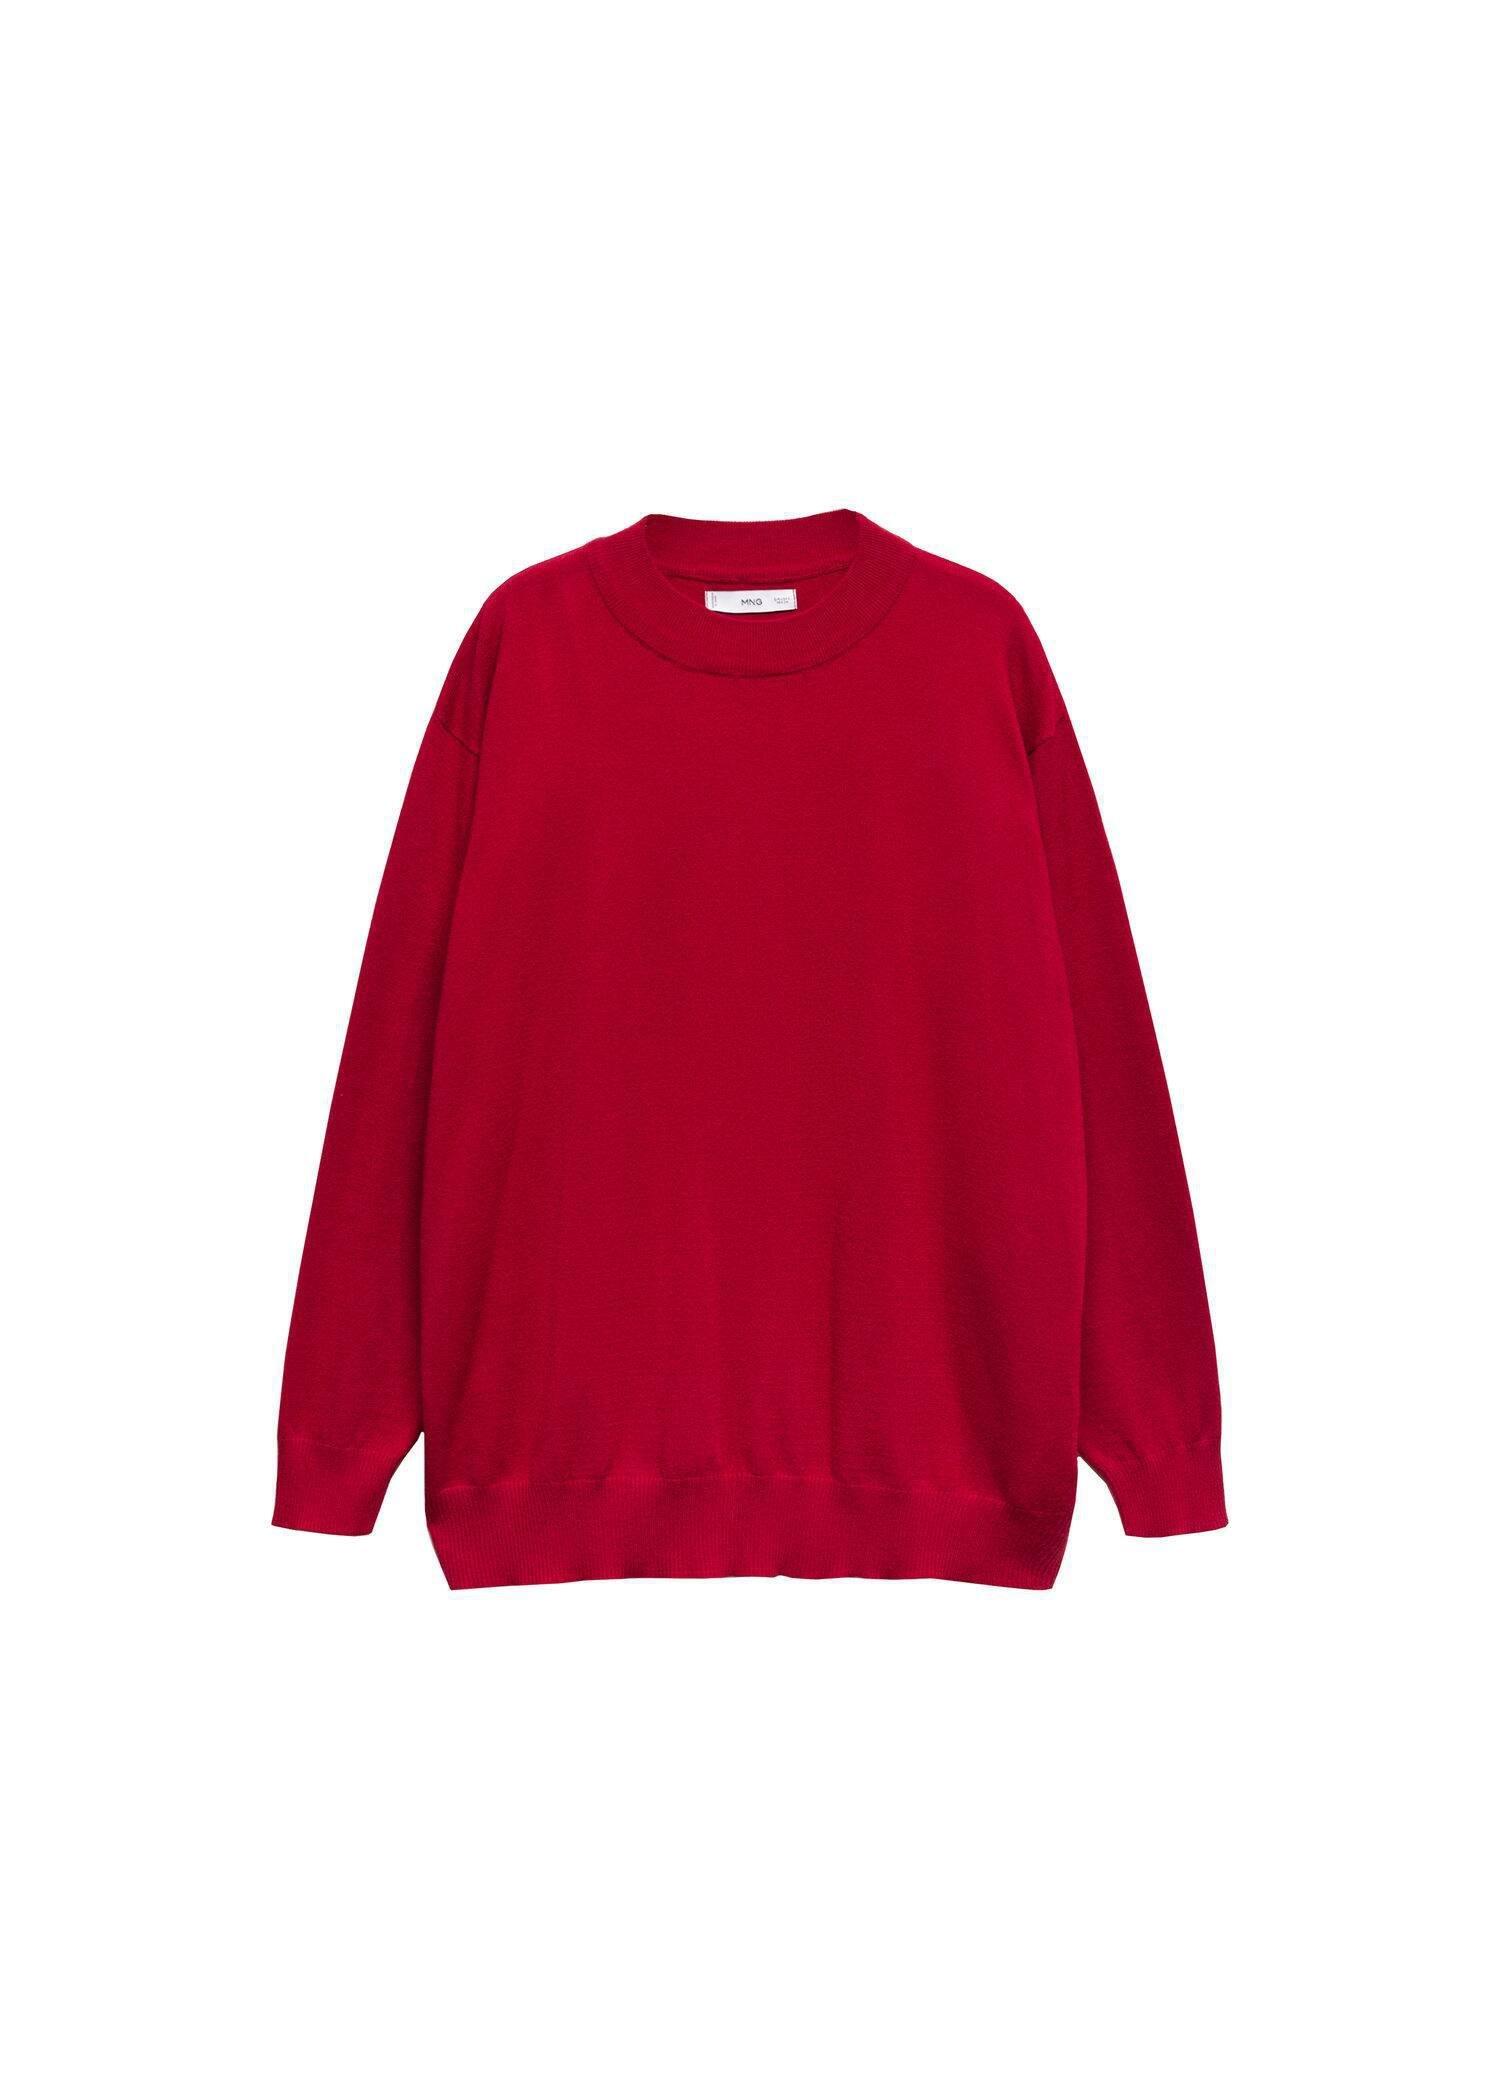 Mango - Red Knitted Sweater